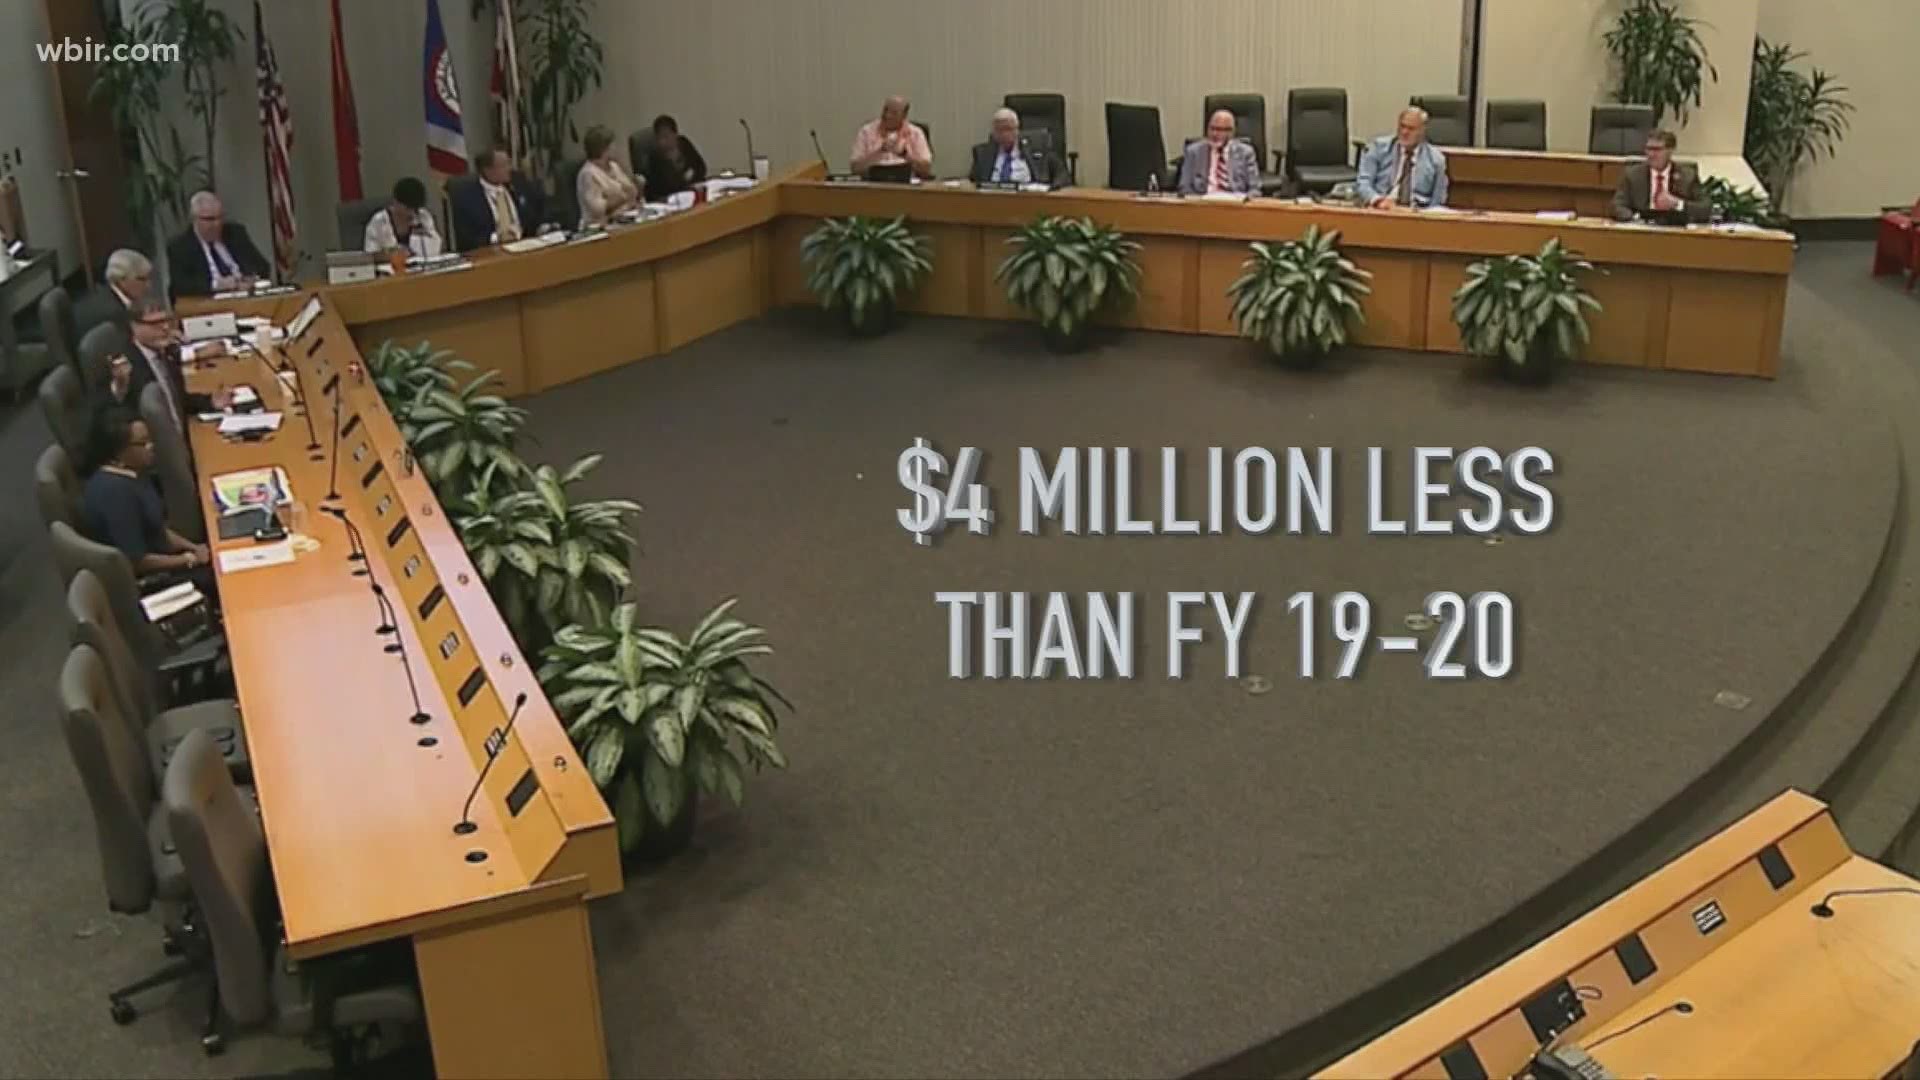 Knox County will begin a new fiscal year under a new budget, and county leaders are making final decisions about what to cut because of lost revenue.